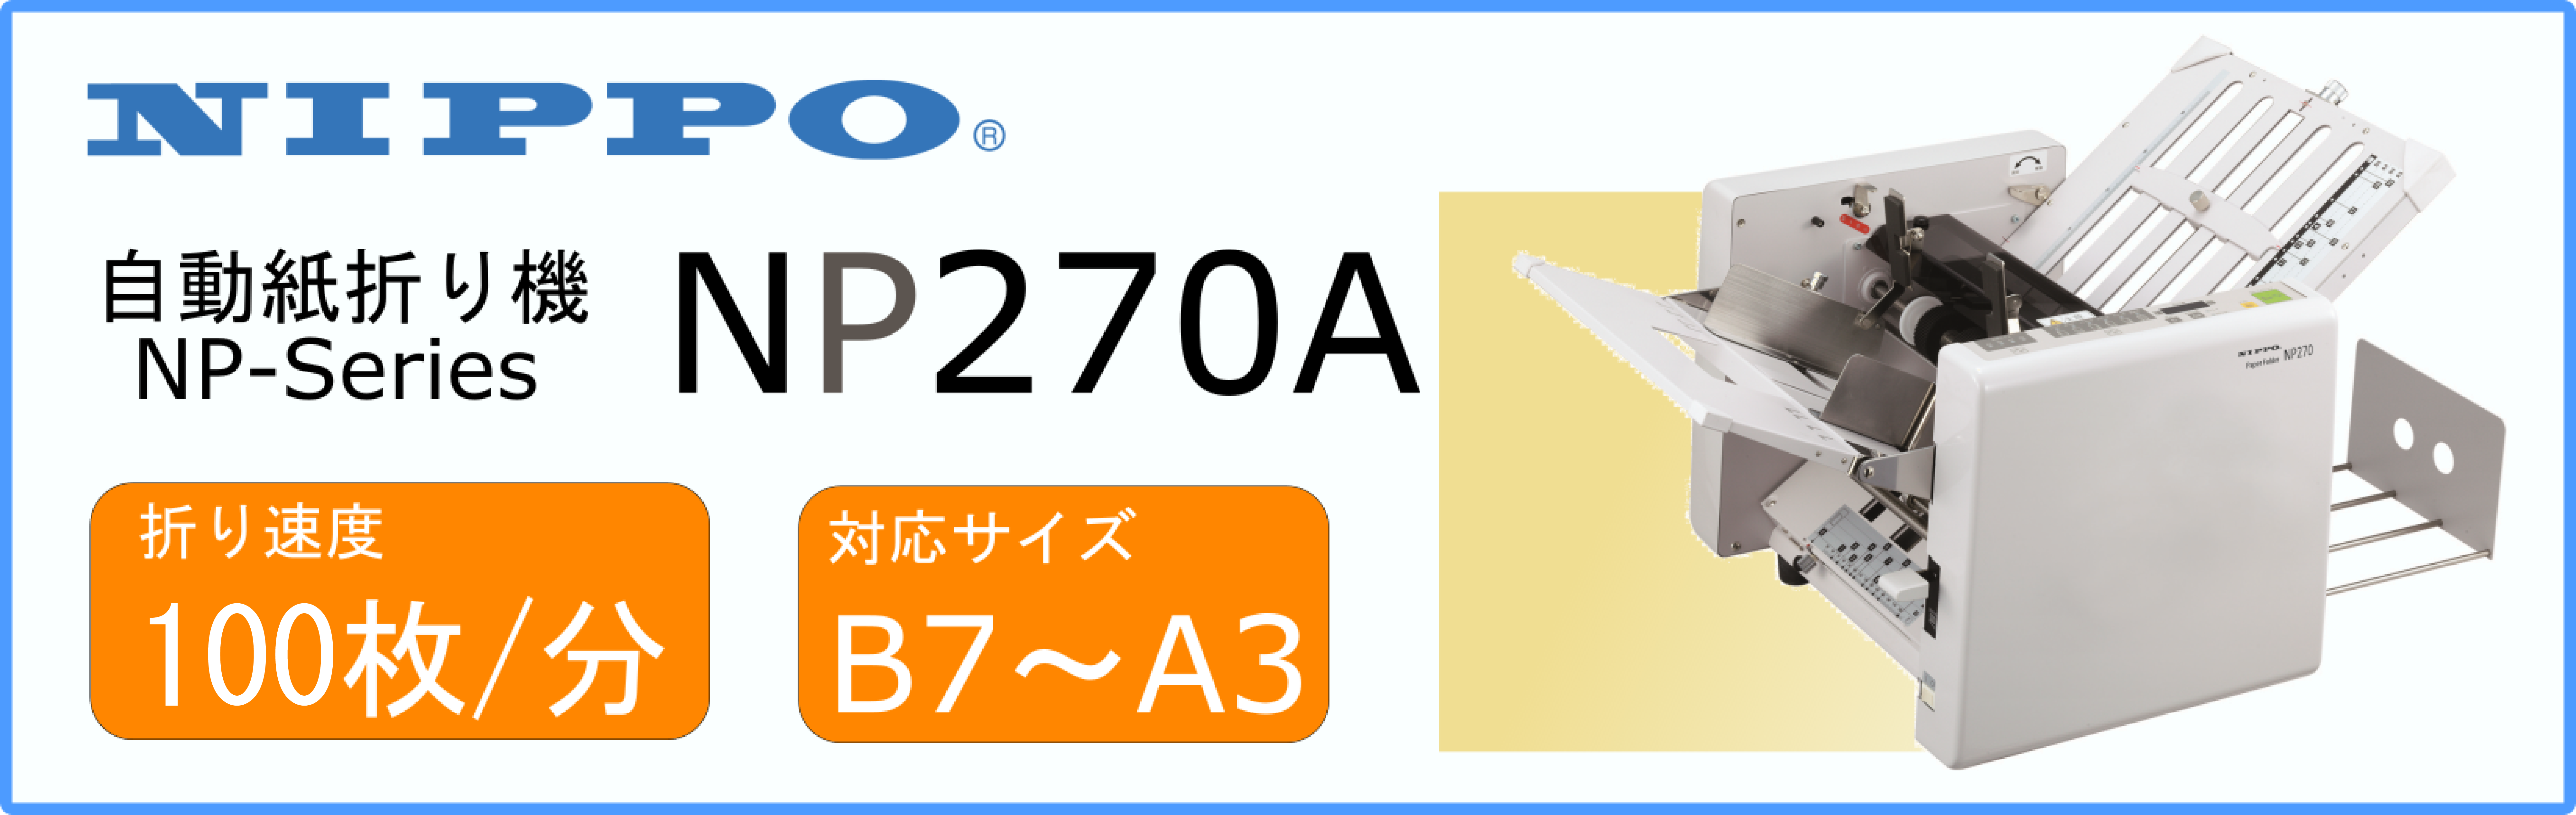 NP270A